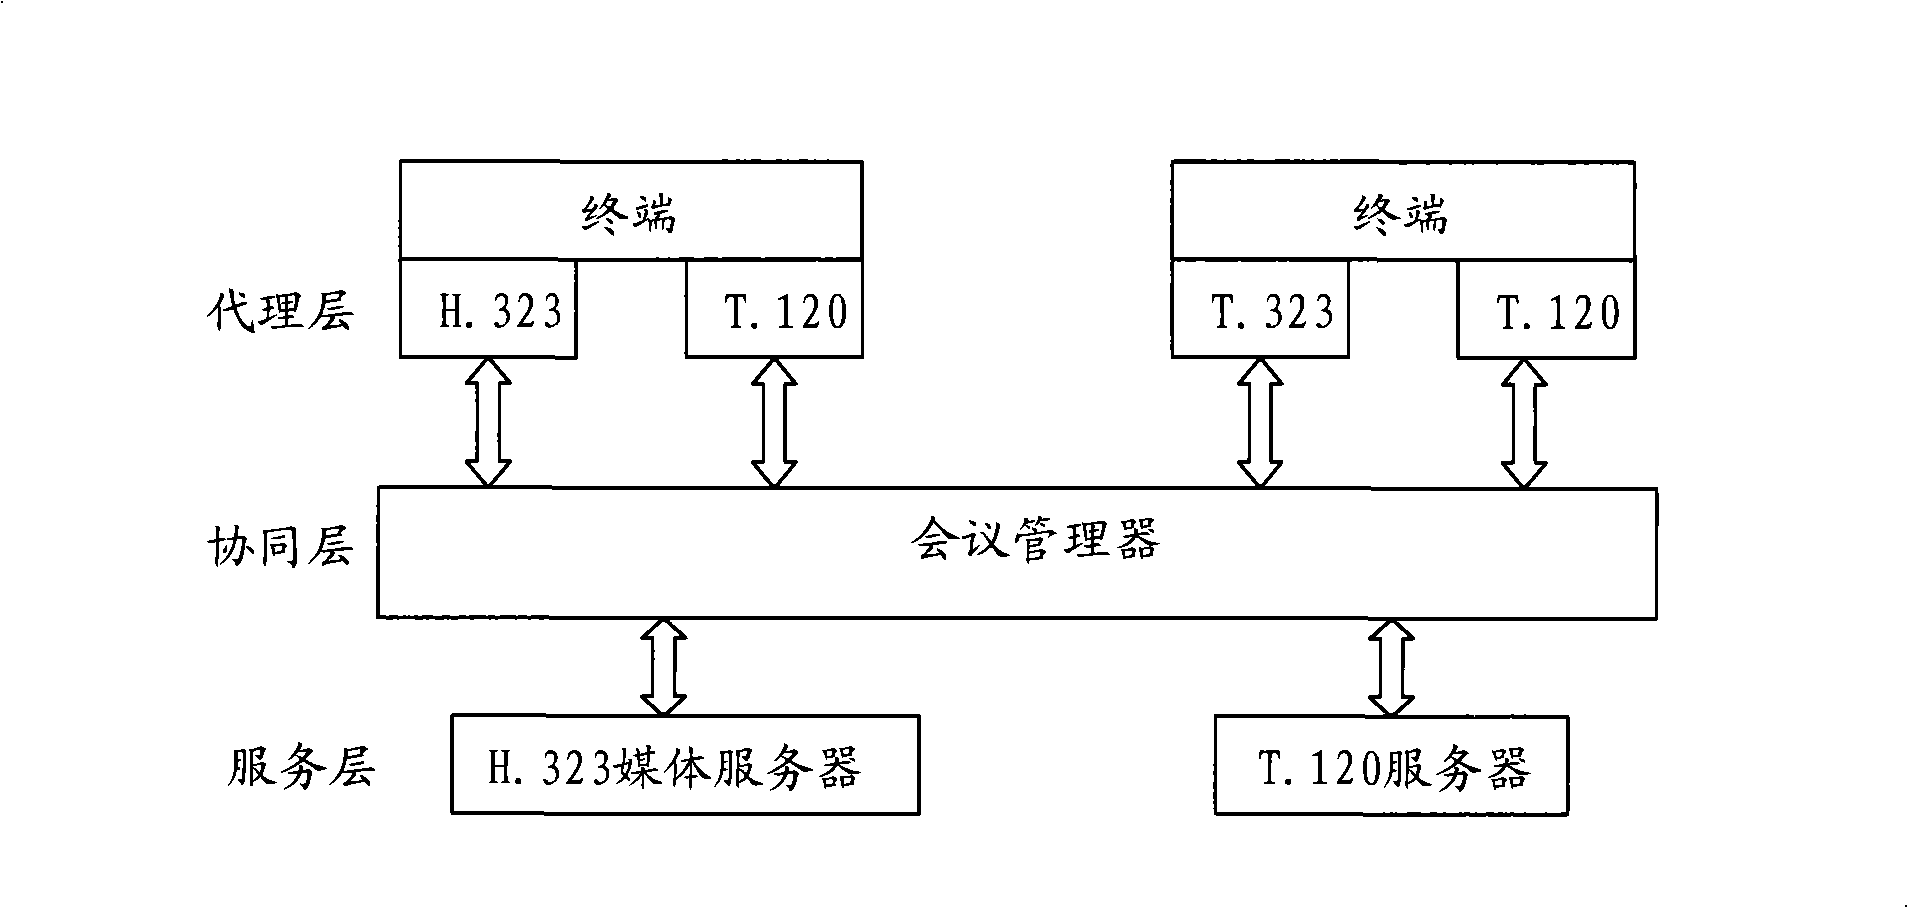 Method, device and system for file sharing in audio/video conference